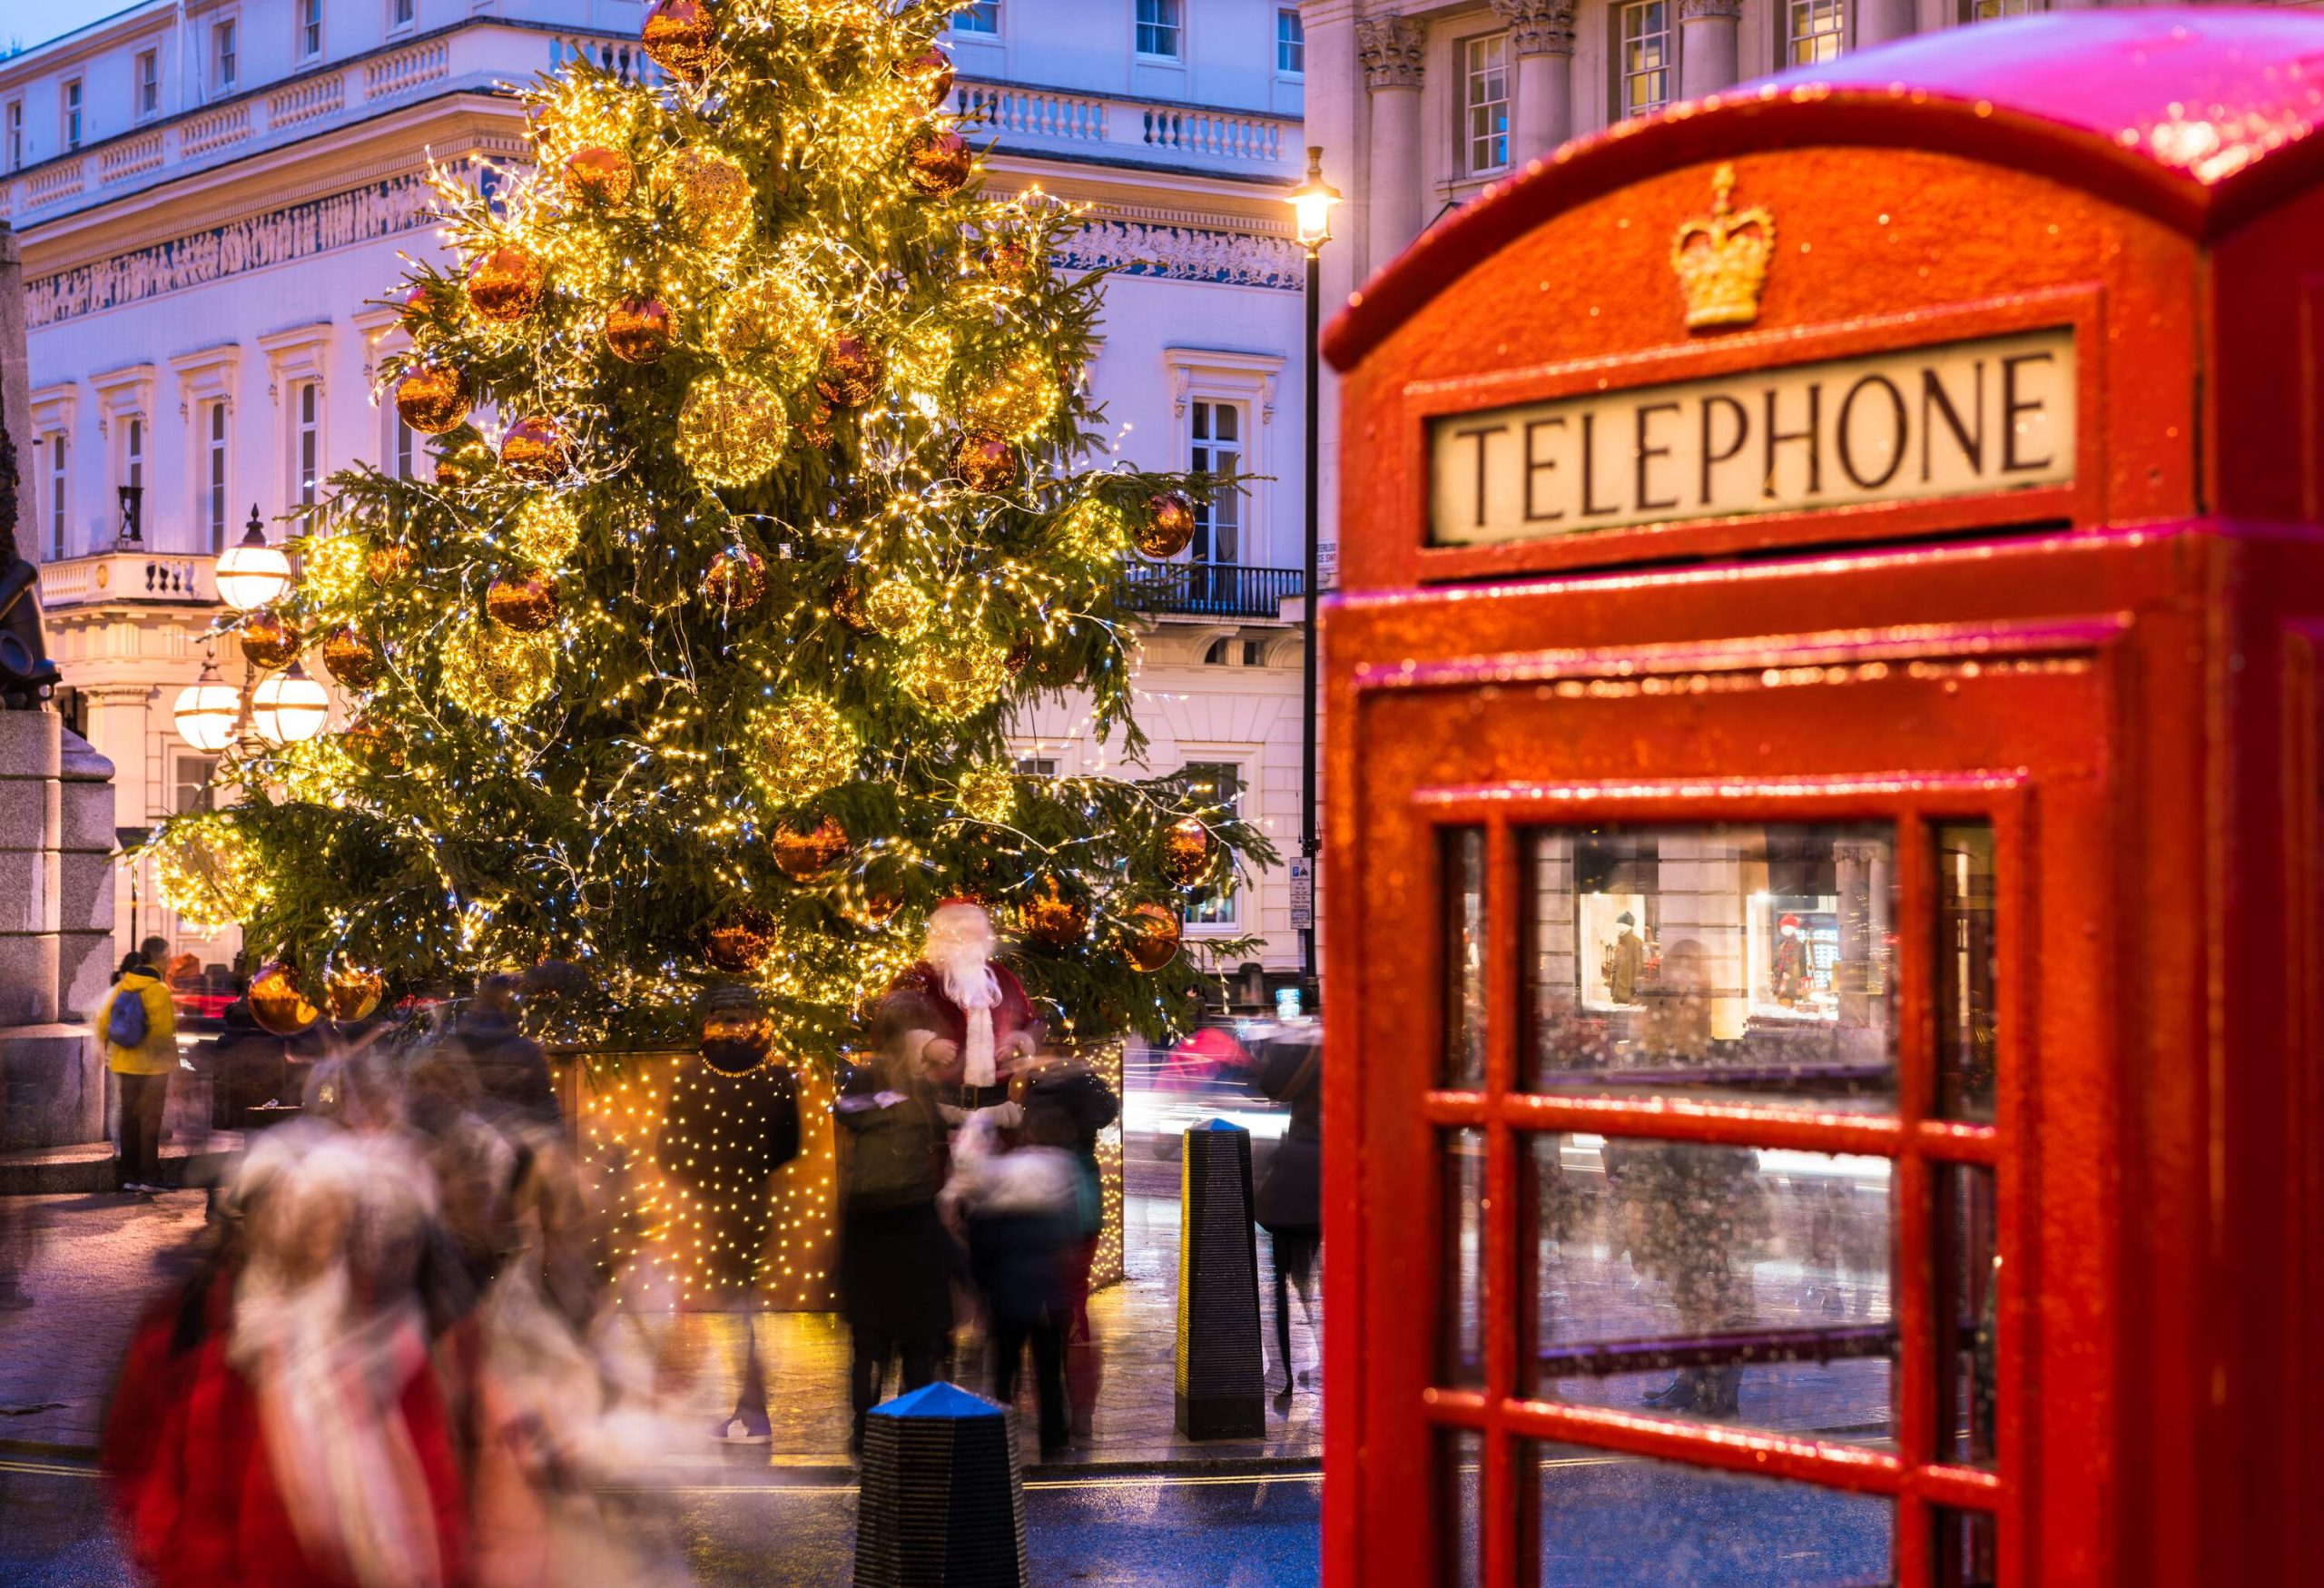 People in motion under giant illuminated Christmas lights and an iconic London telephone booth.